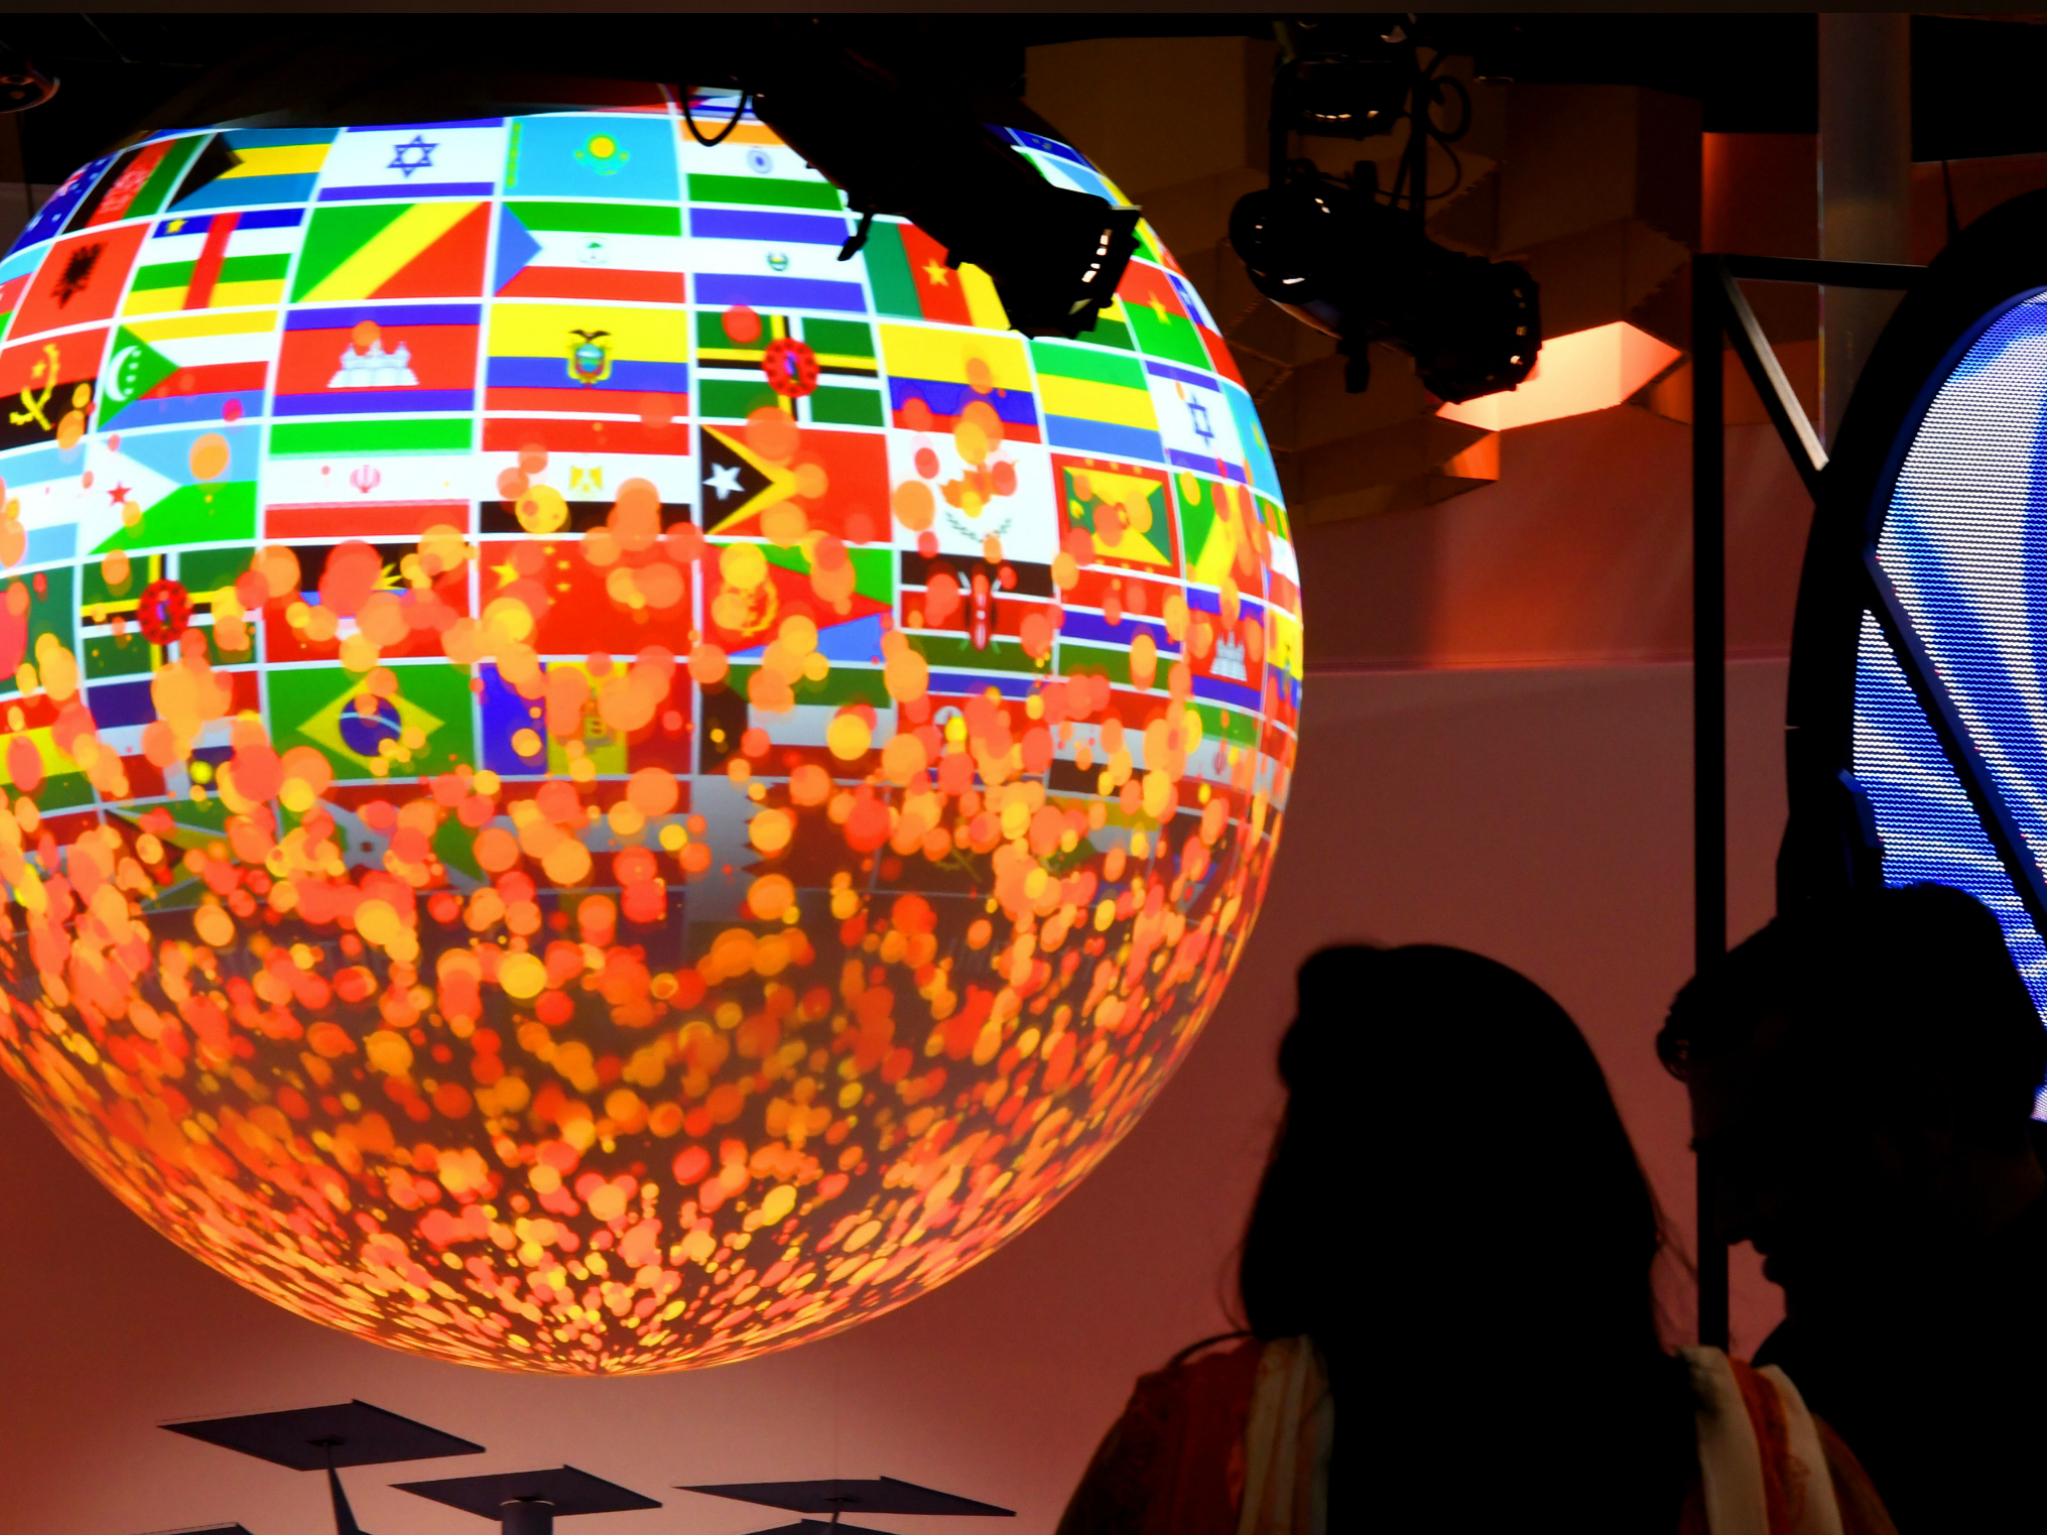 Visitors look at a sphere displayed at the pavillion of India on 8 November 2017 during the COP23 United Nations Climate Change Conference in Bonn, Germany.